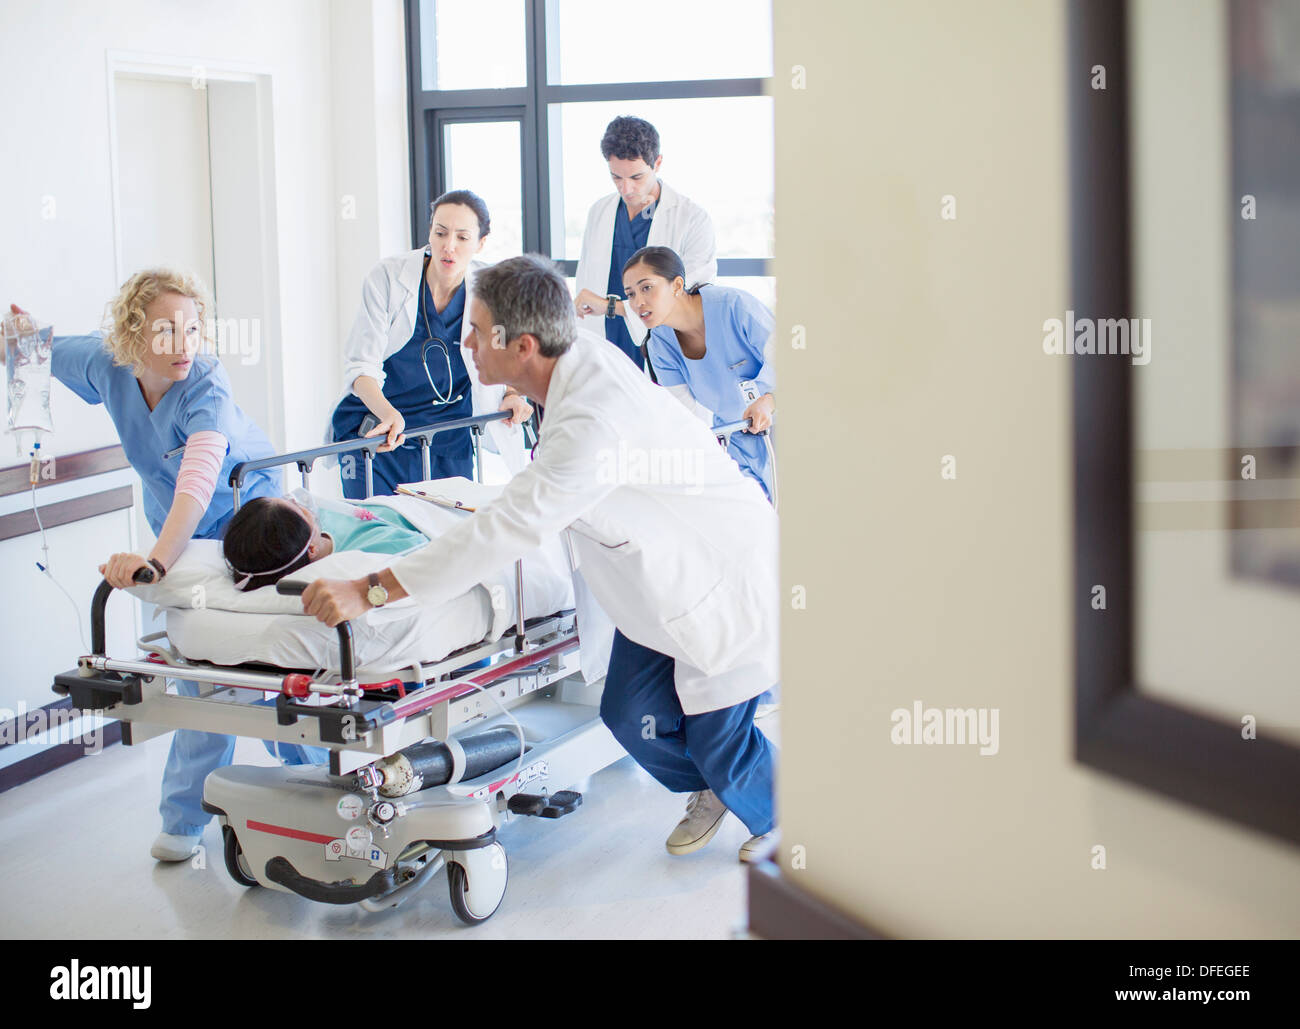 Doctors rushing patient on stretcher down hospital corridor Banque D'Images